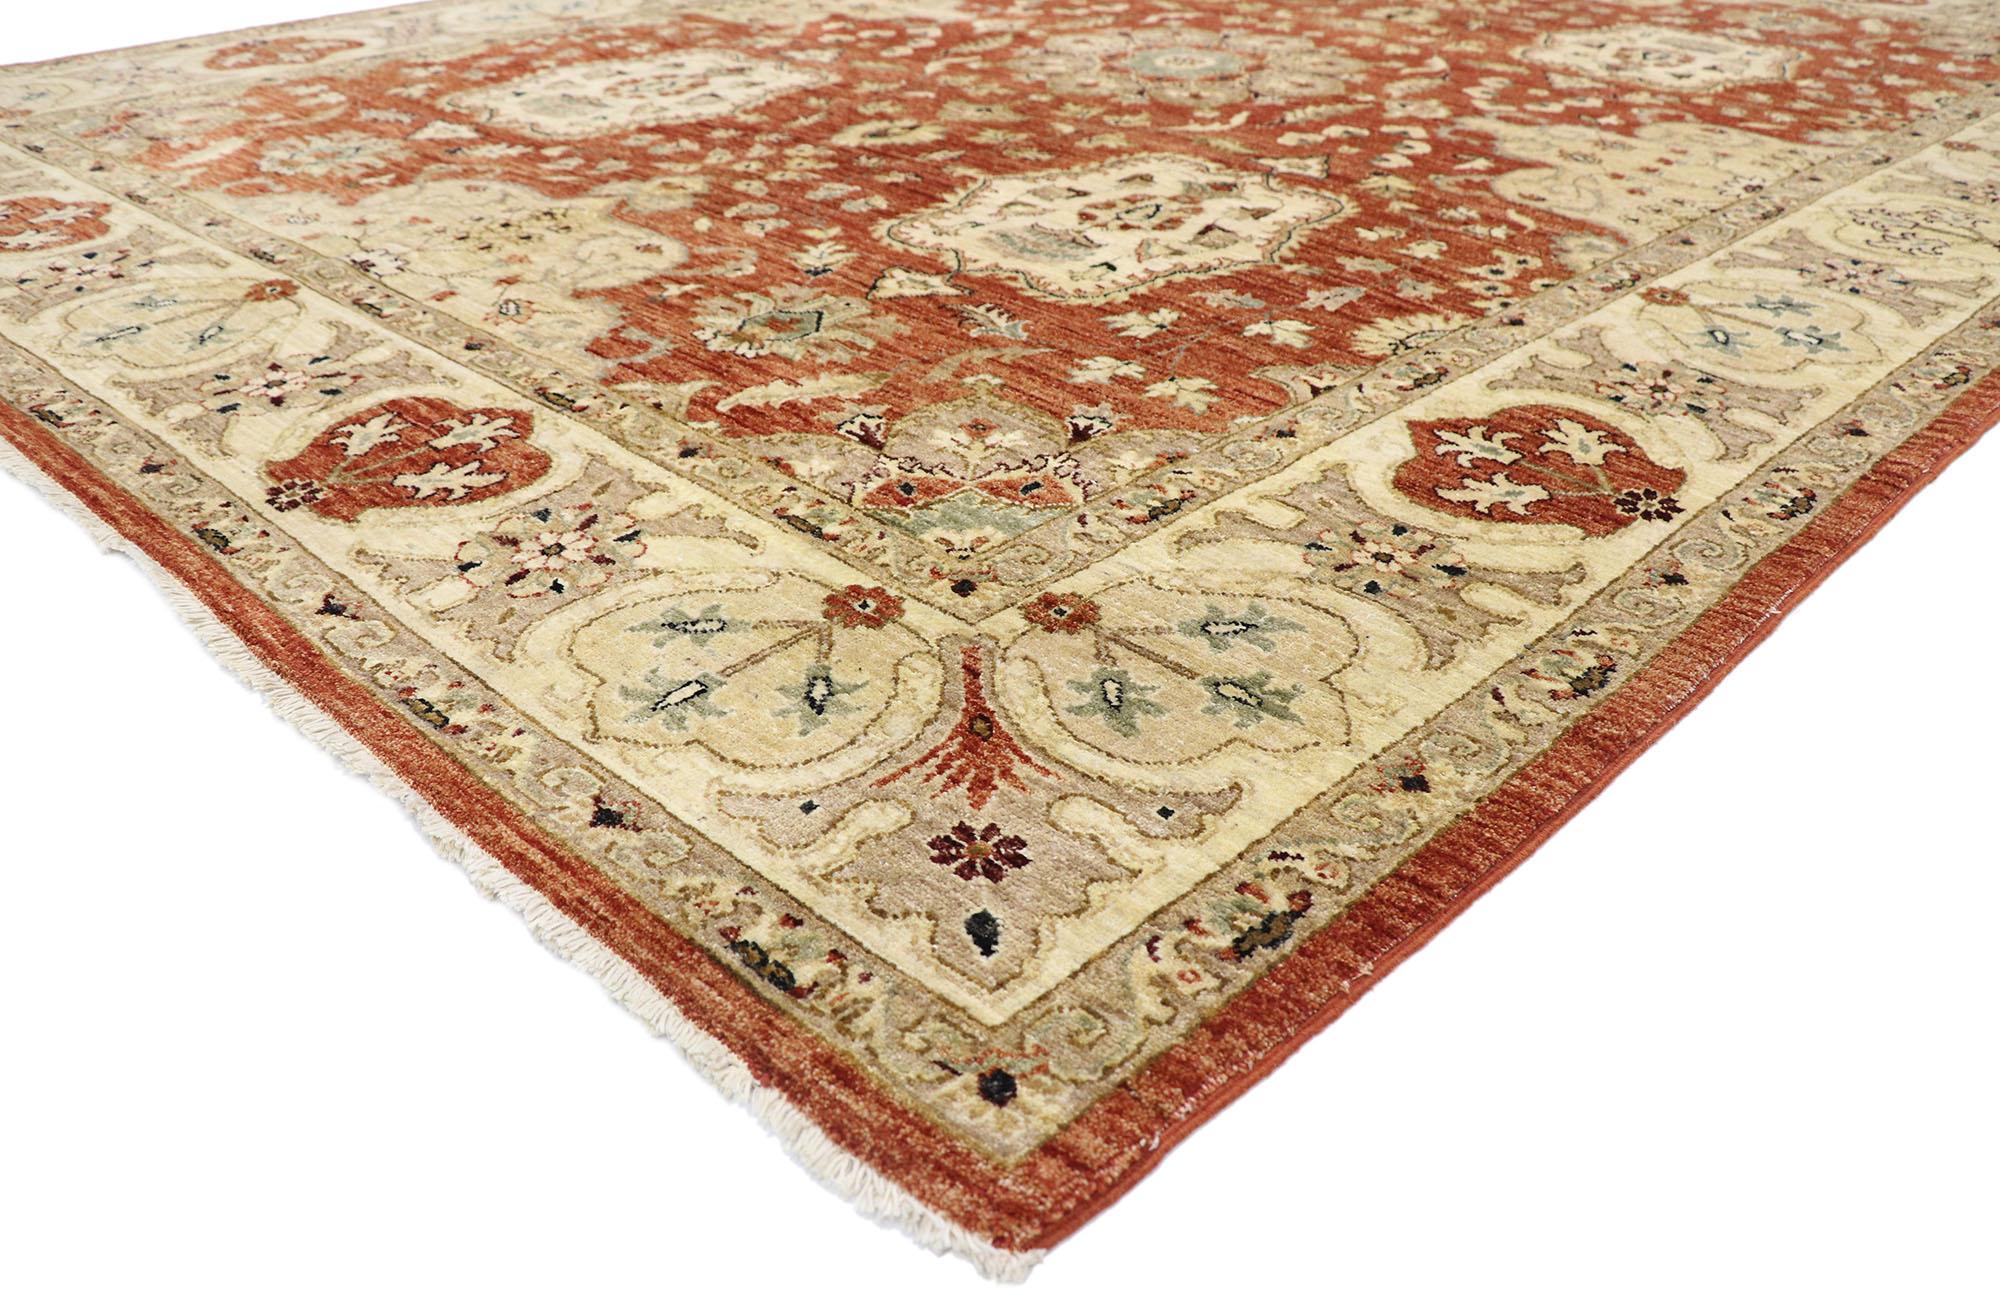 77789 vintage Pakistani rug with Traditional style 08'11 x 12'00. With its timeless design and warm earth-tone colors, this hand-knotted wool vintage Pakistani rug astounds with its beauty. The abrashed rust colored field features an eight point